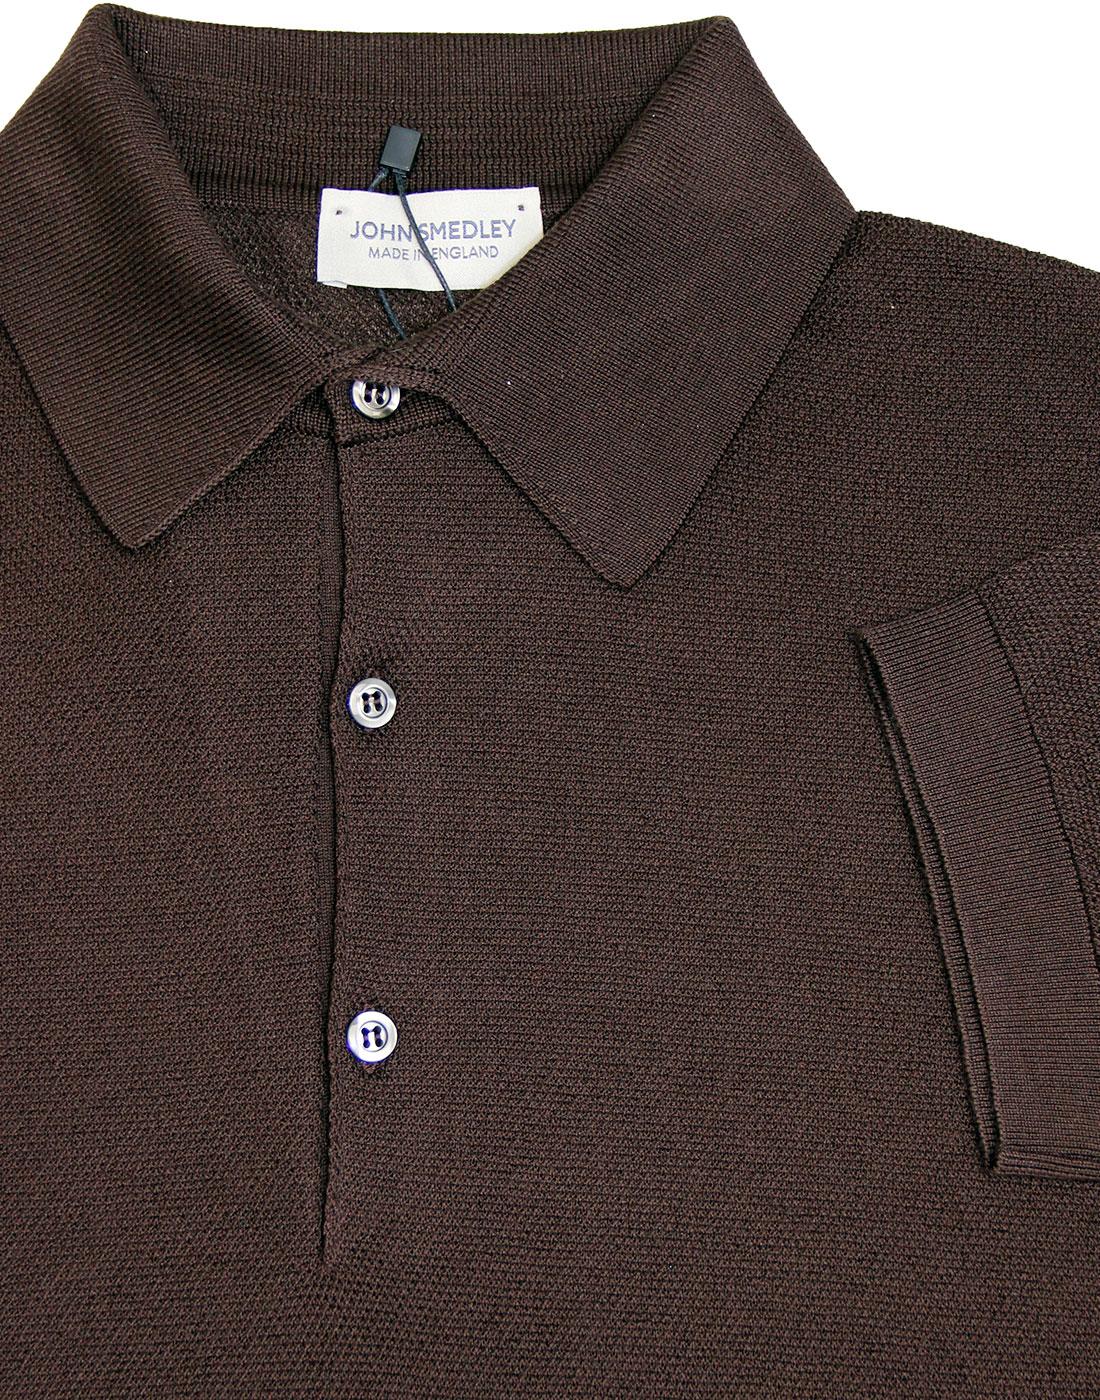 JOHN SMEDLEY 'Roth' Mod Texture Polo in Dark Leather